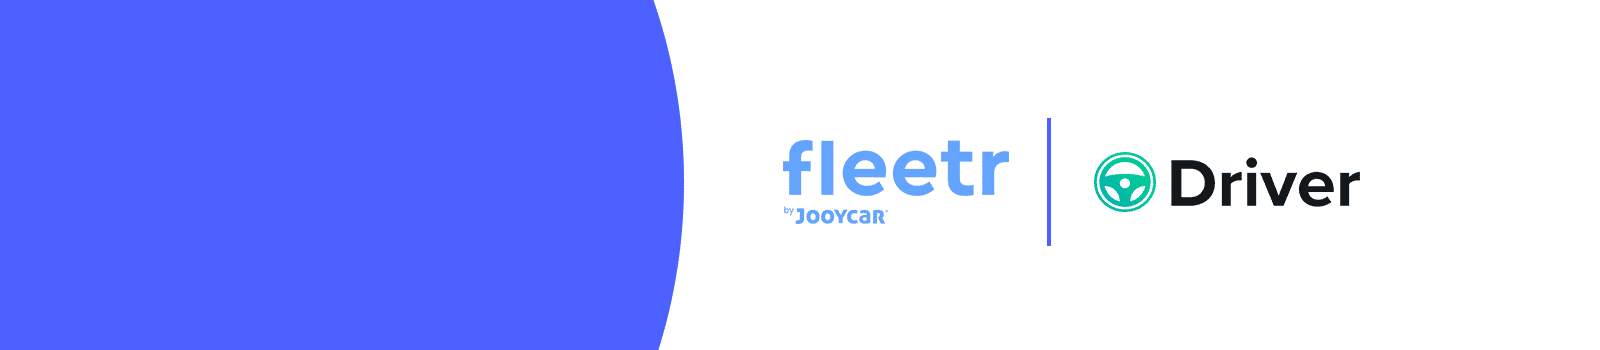 Fleetr and Driver Technologies announce partnership to offer fleet owners innovative road safety solutions